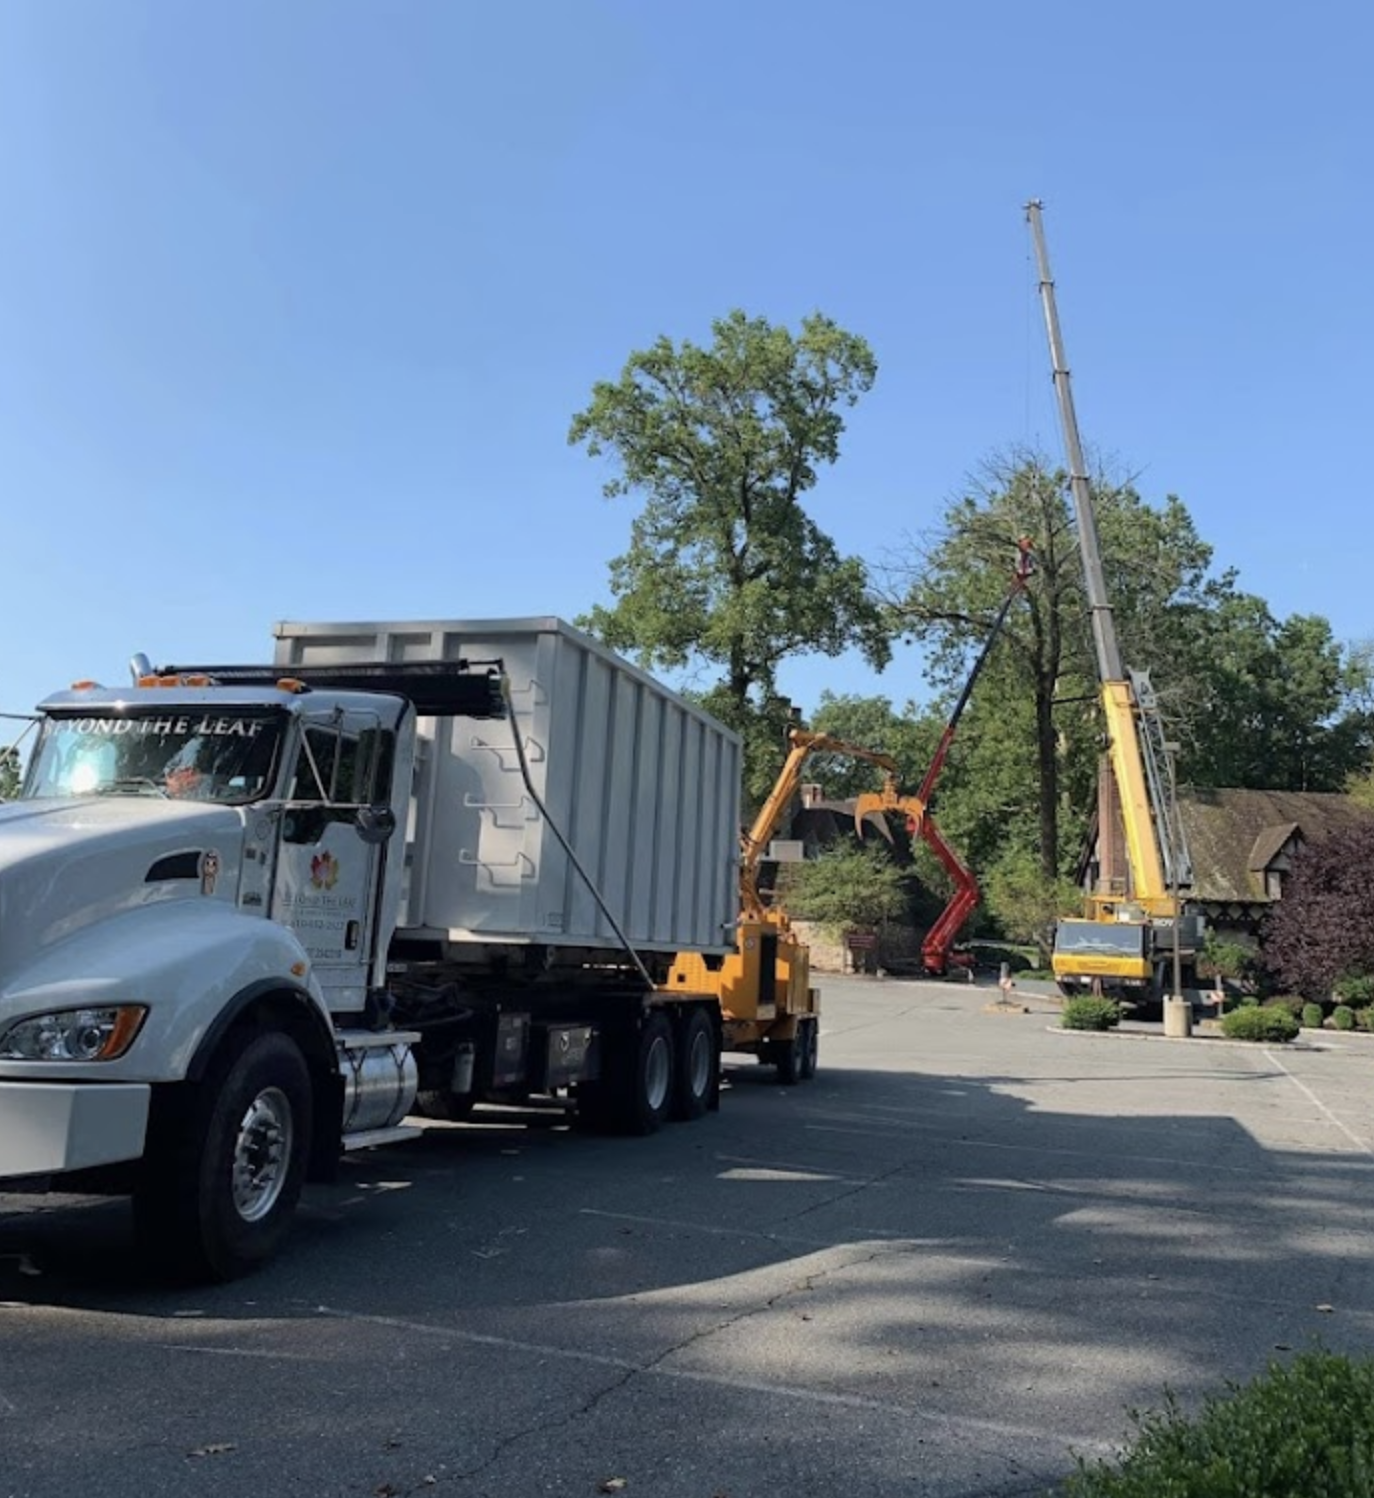 Truck & Crane for Tree Removal